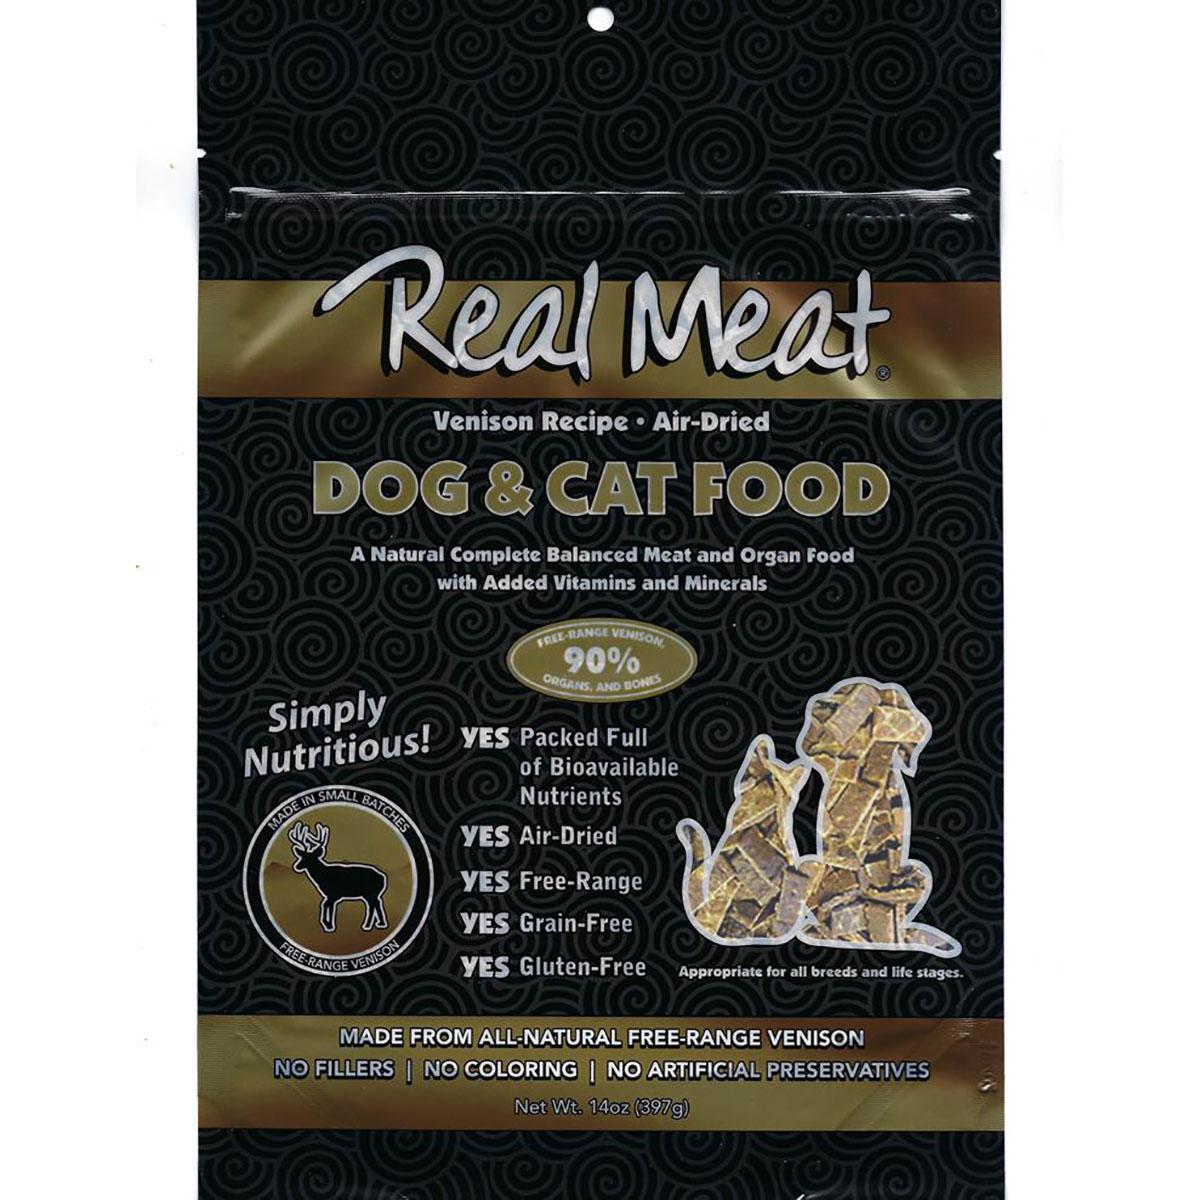 Real Meat Tiny Trainers: The Real Meat Company